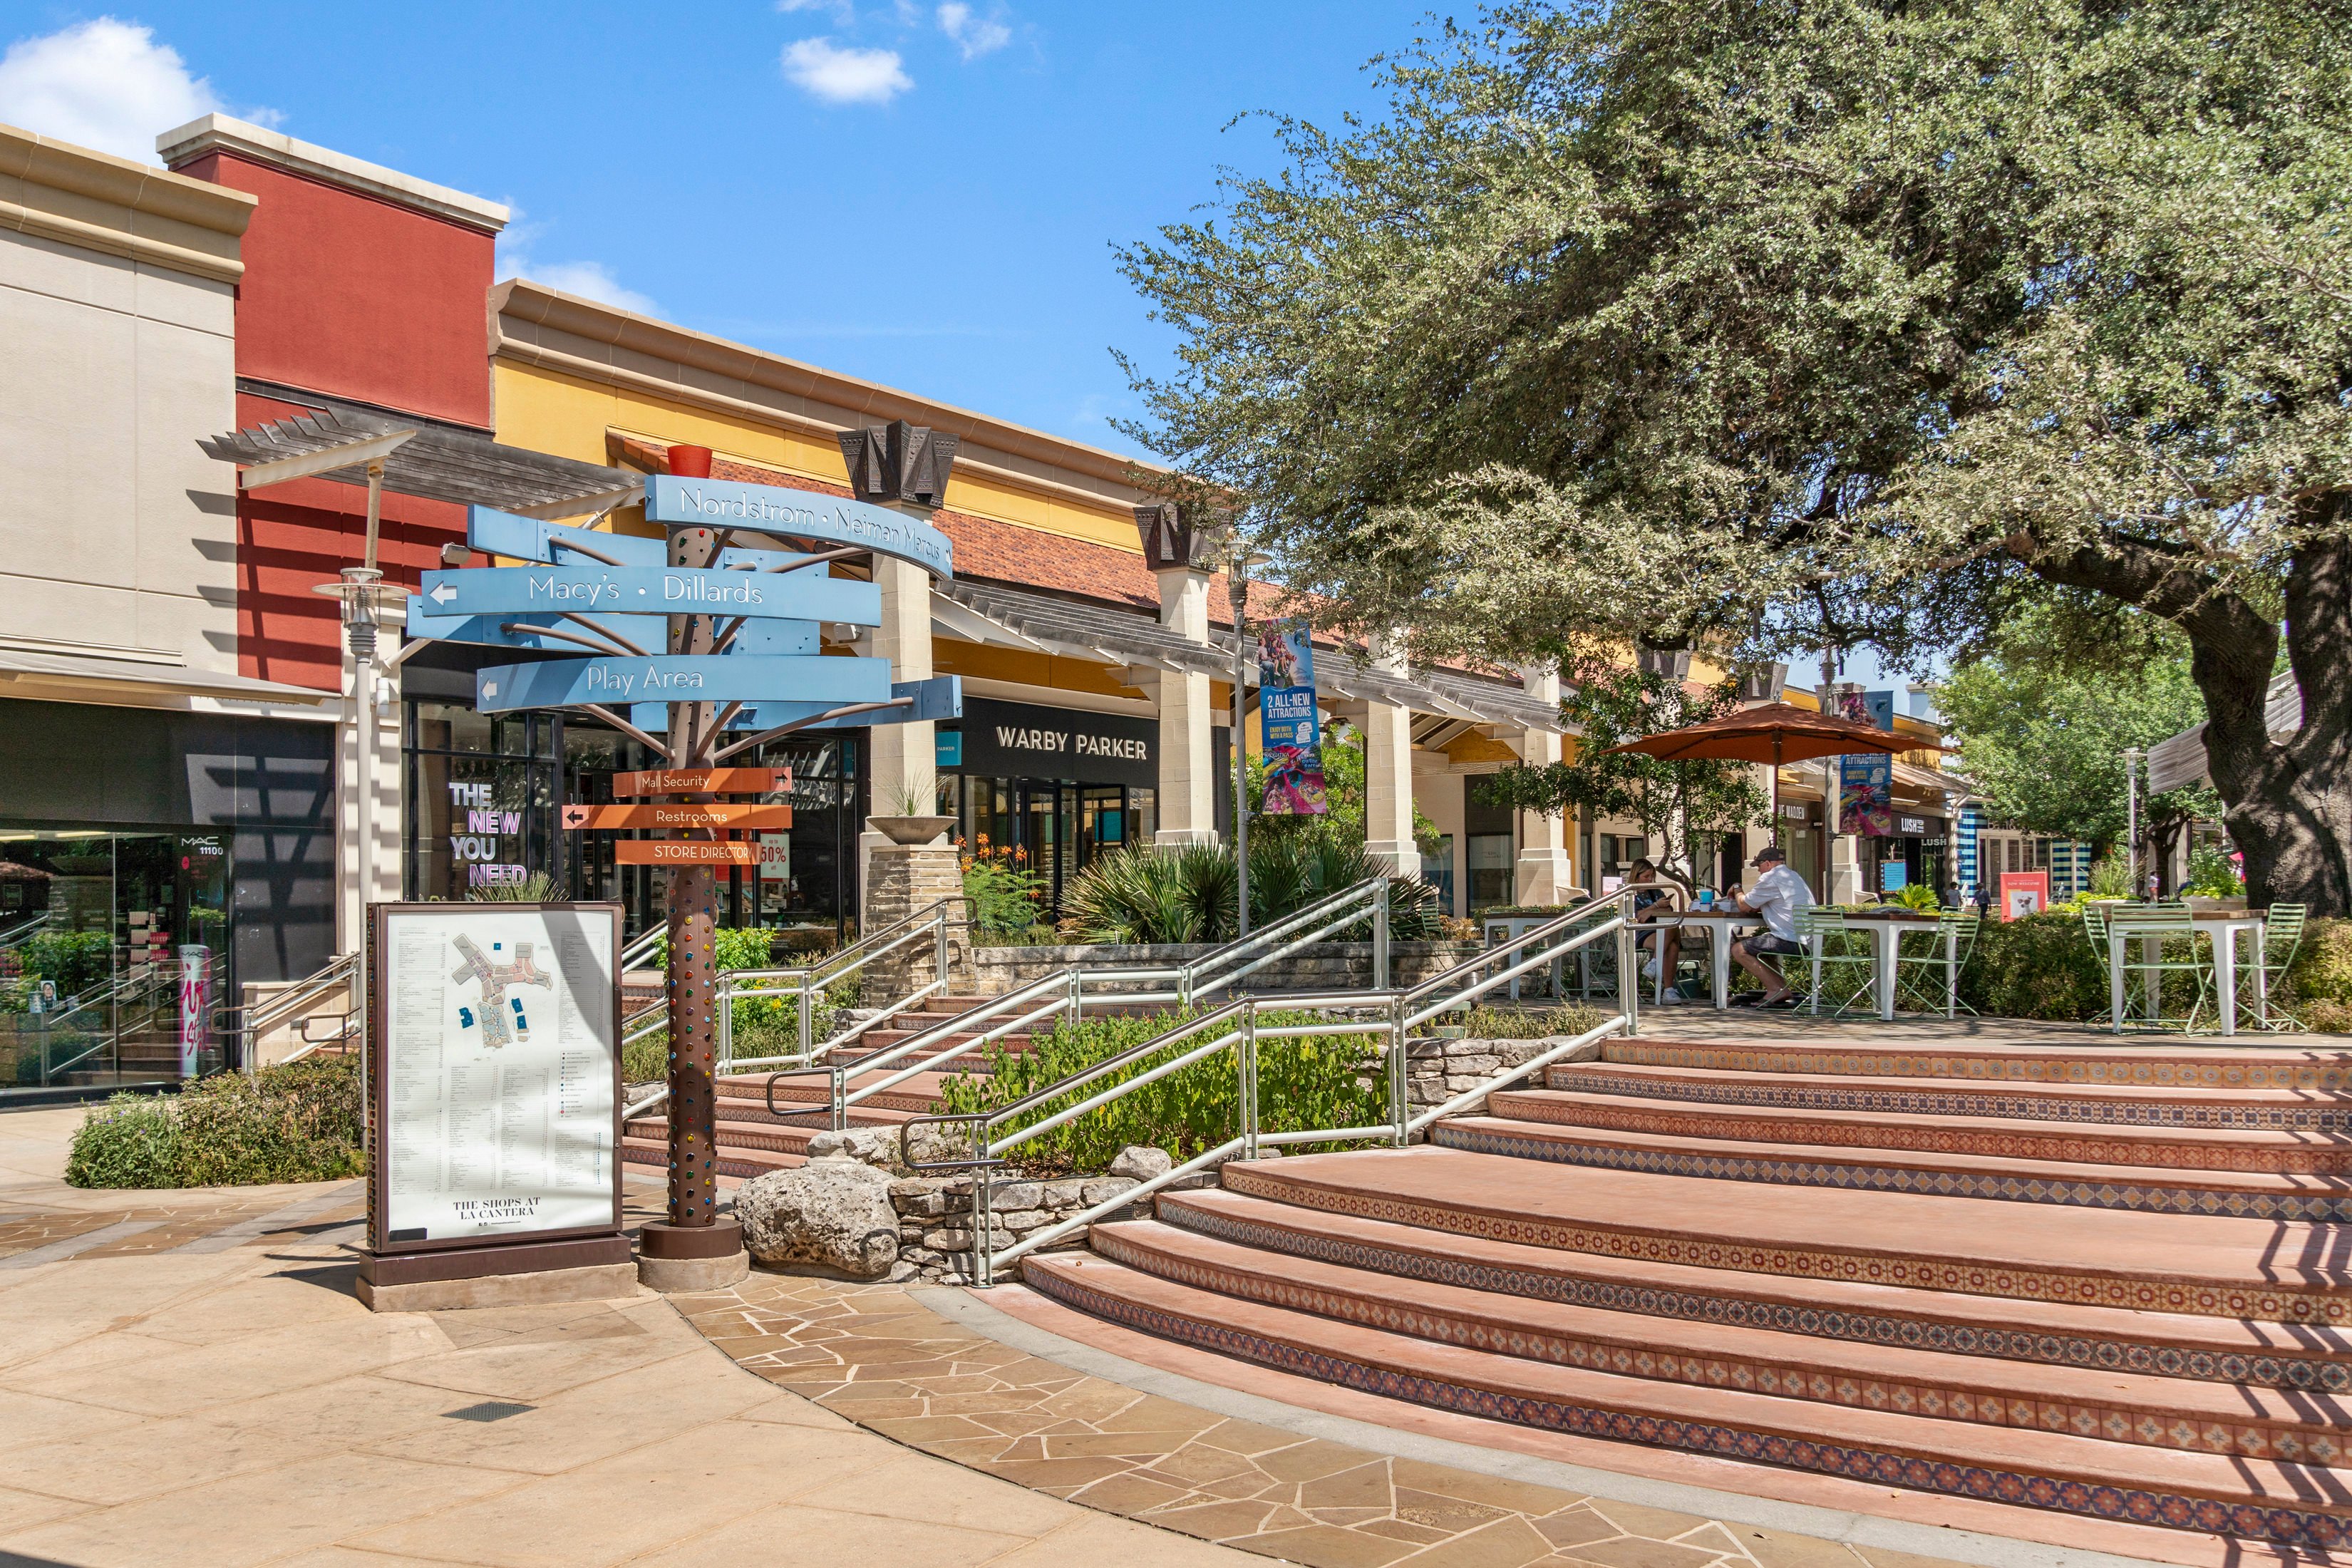 Just 5 minutes to The Shops at La Cantera